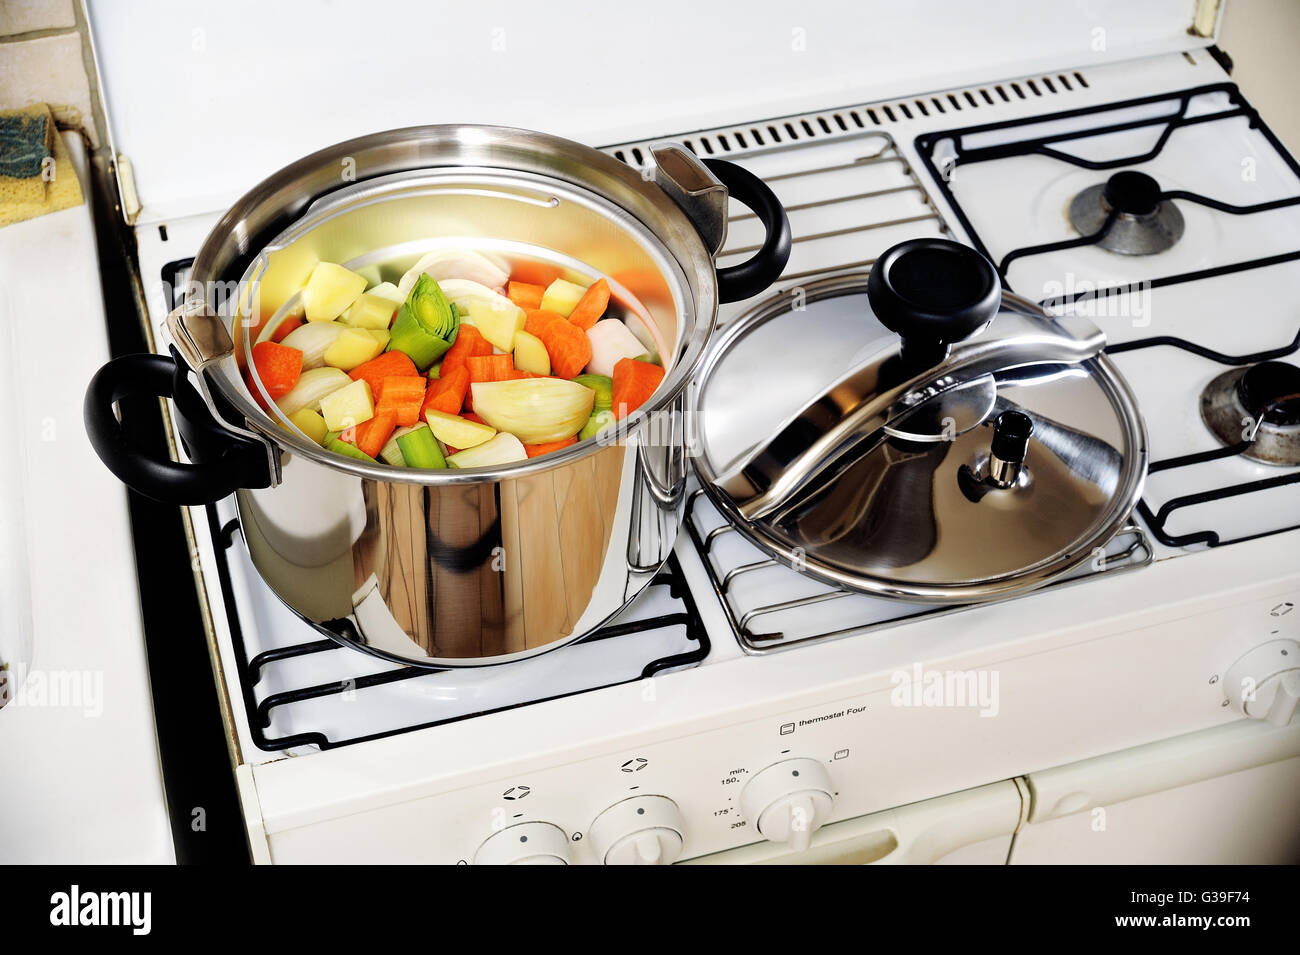 Pressure cooker stainless steel French-made for cooking food in steam Stock  Photo - Alamy